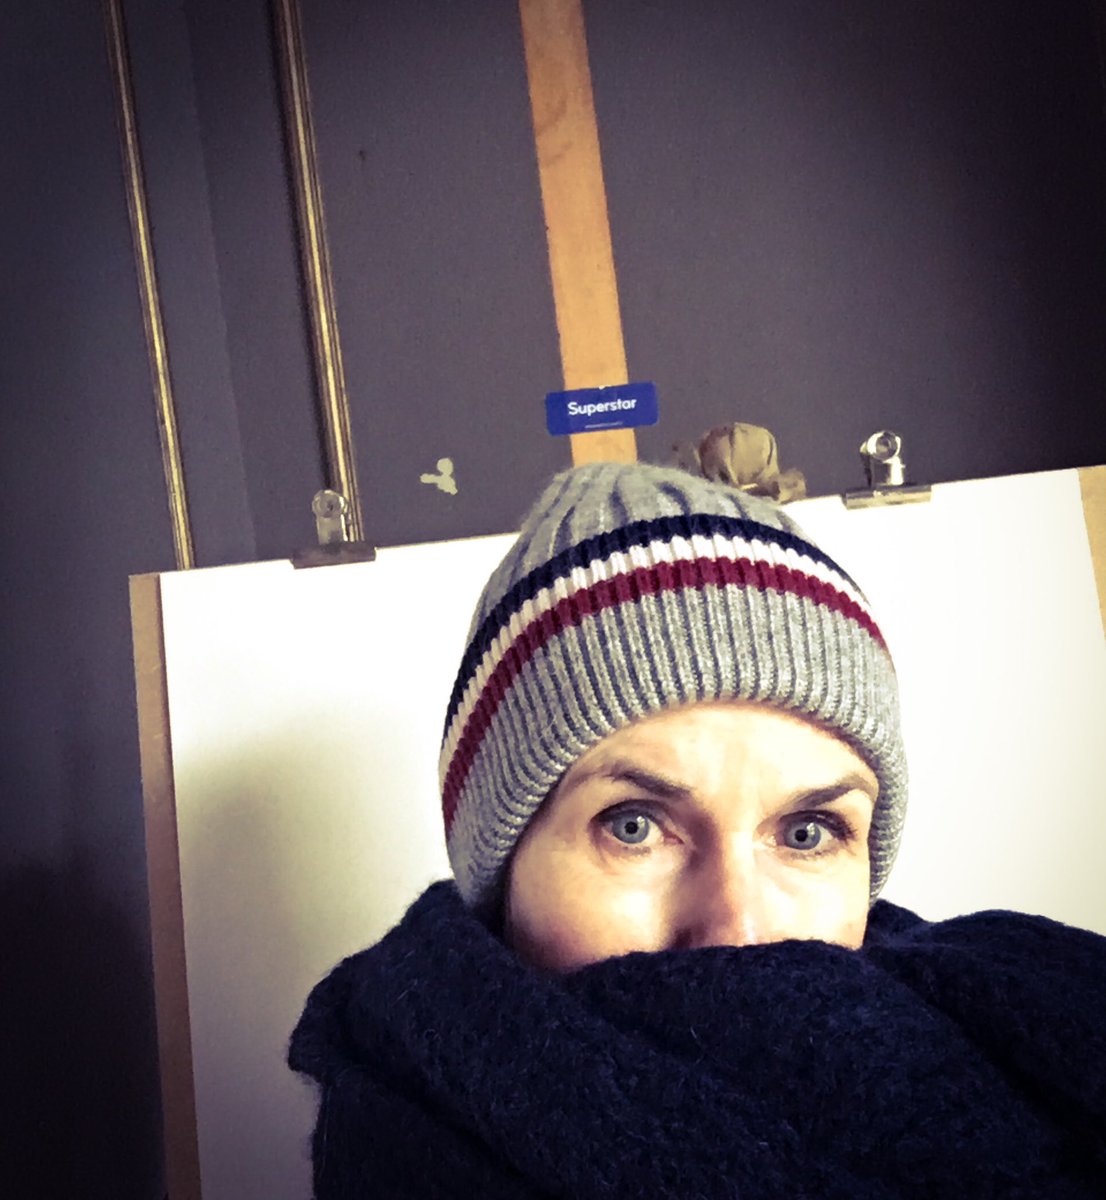 Studio life ❄️💙❄️

Been standing infront of this blank drawing paper for 2 hours now - think I’ll call it a day! 🥶😭😅

#artist #womanartist #studio #atelier #painter #freeze #Winter2024 #snow #winterblues #artistsblock